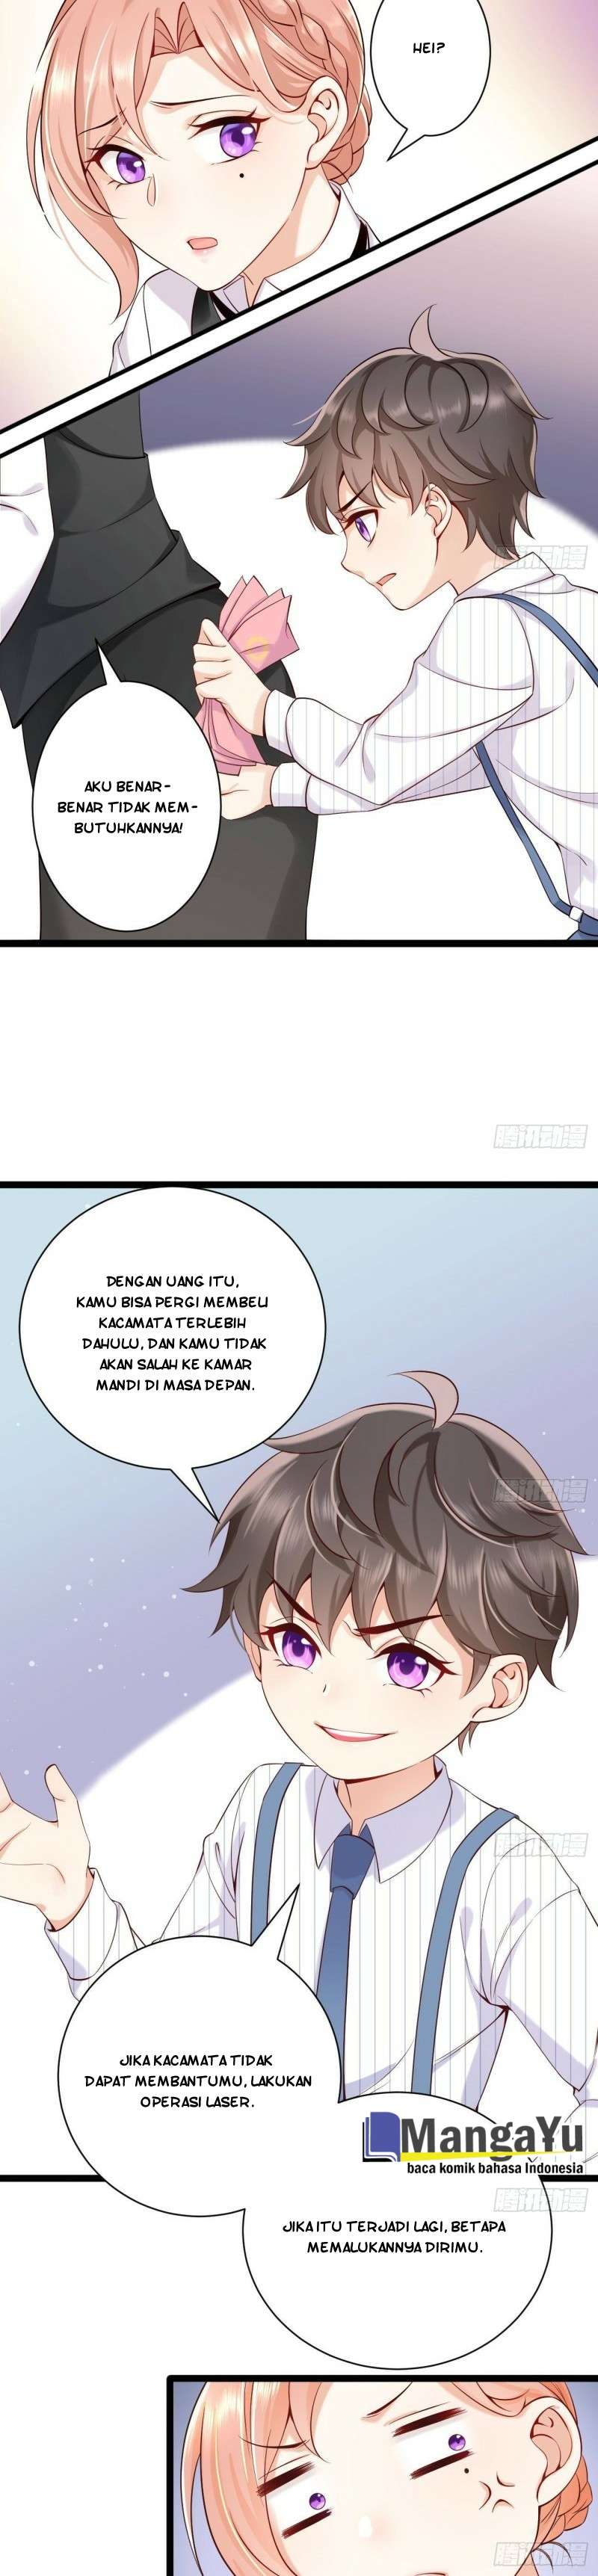 Two Kids Worth Billions Chapter 04 8